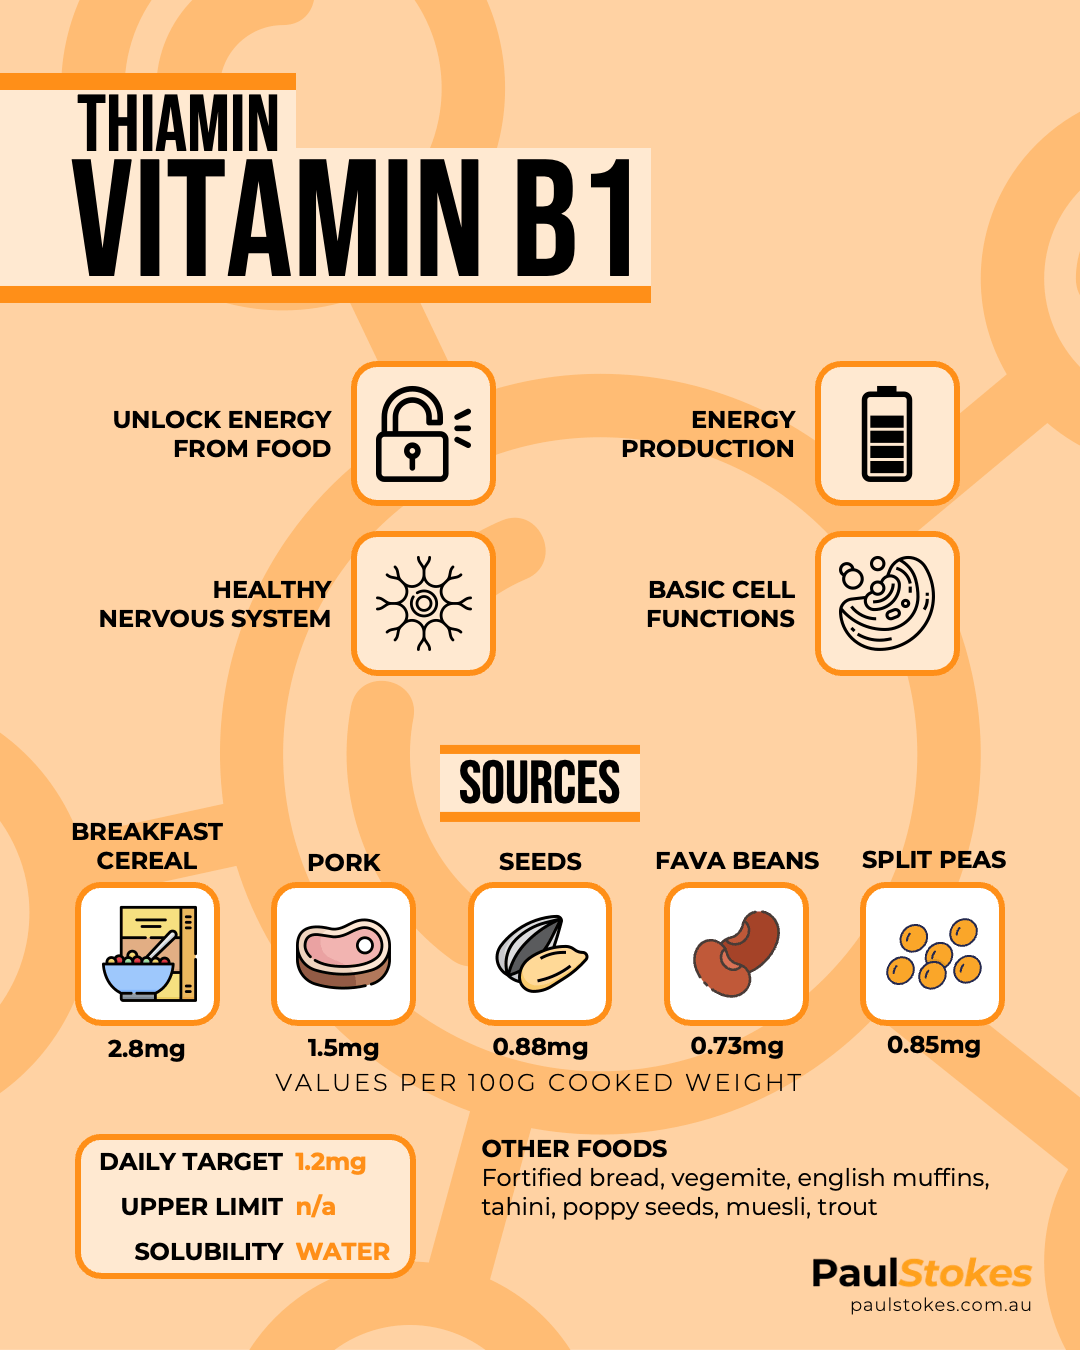 Vitamin B1 Thiamin Infographic showing actions, food sources, daily requirements and solubility